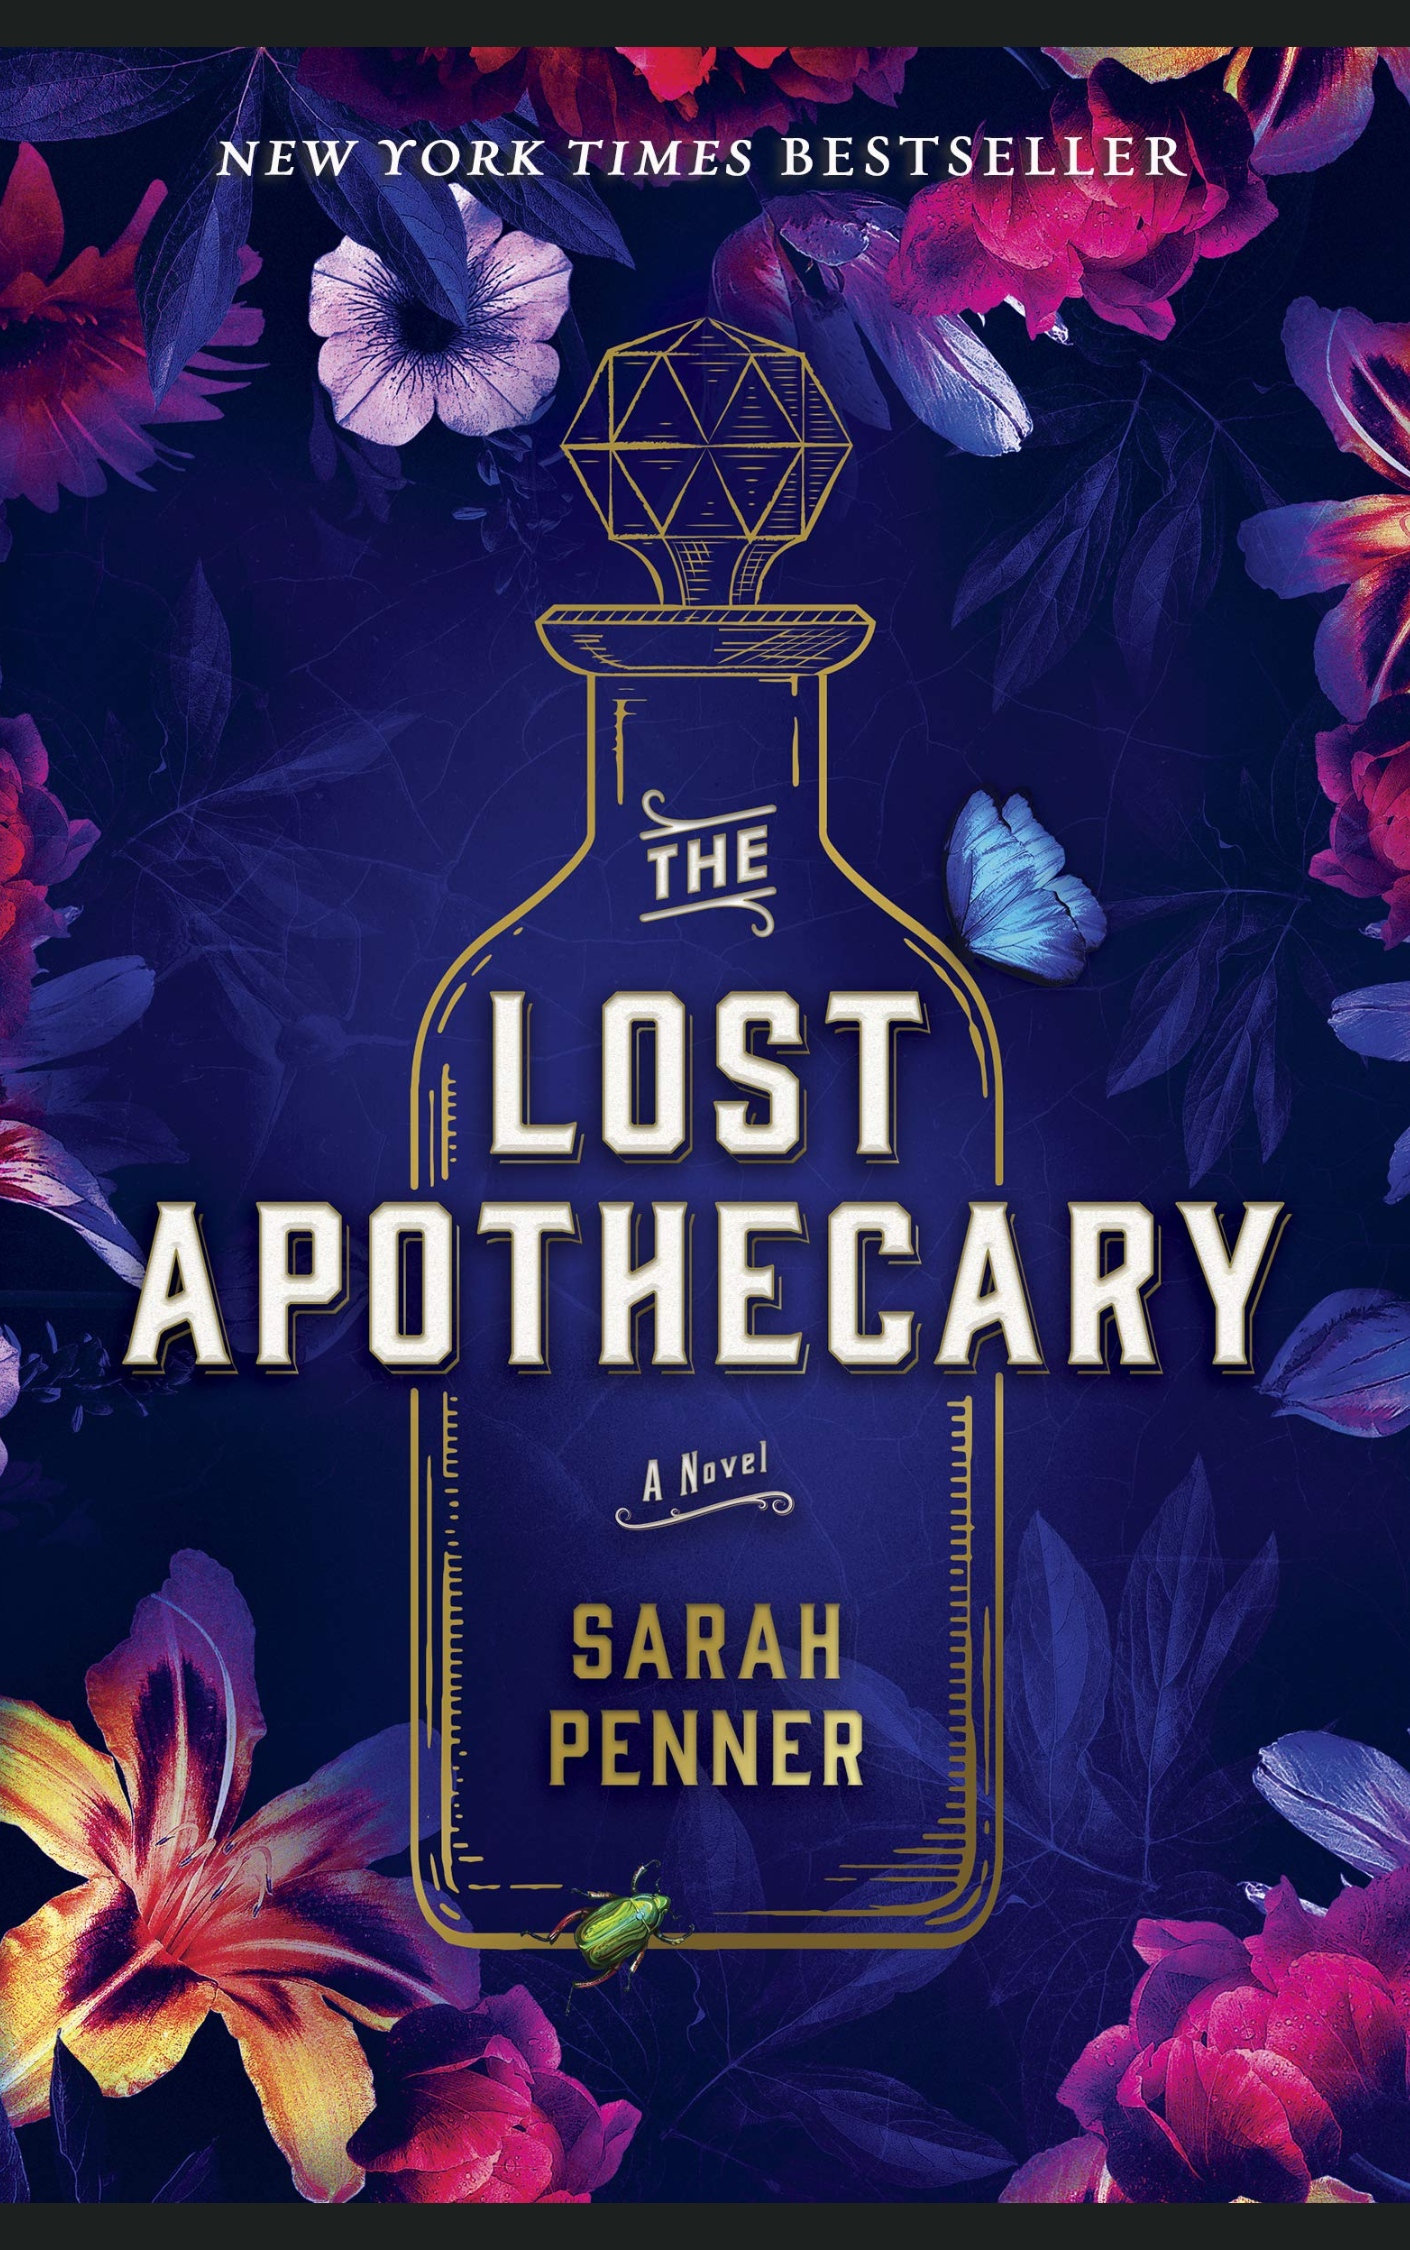 THE LOST APOTHECARY By SARAH PENNER